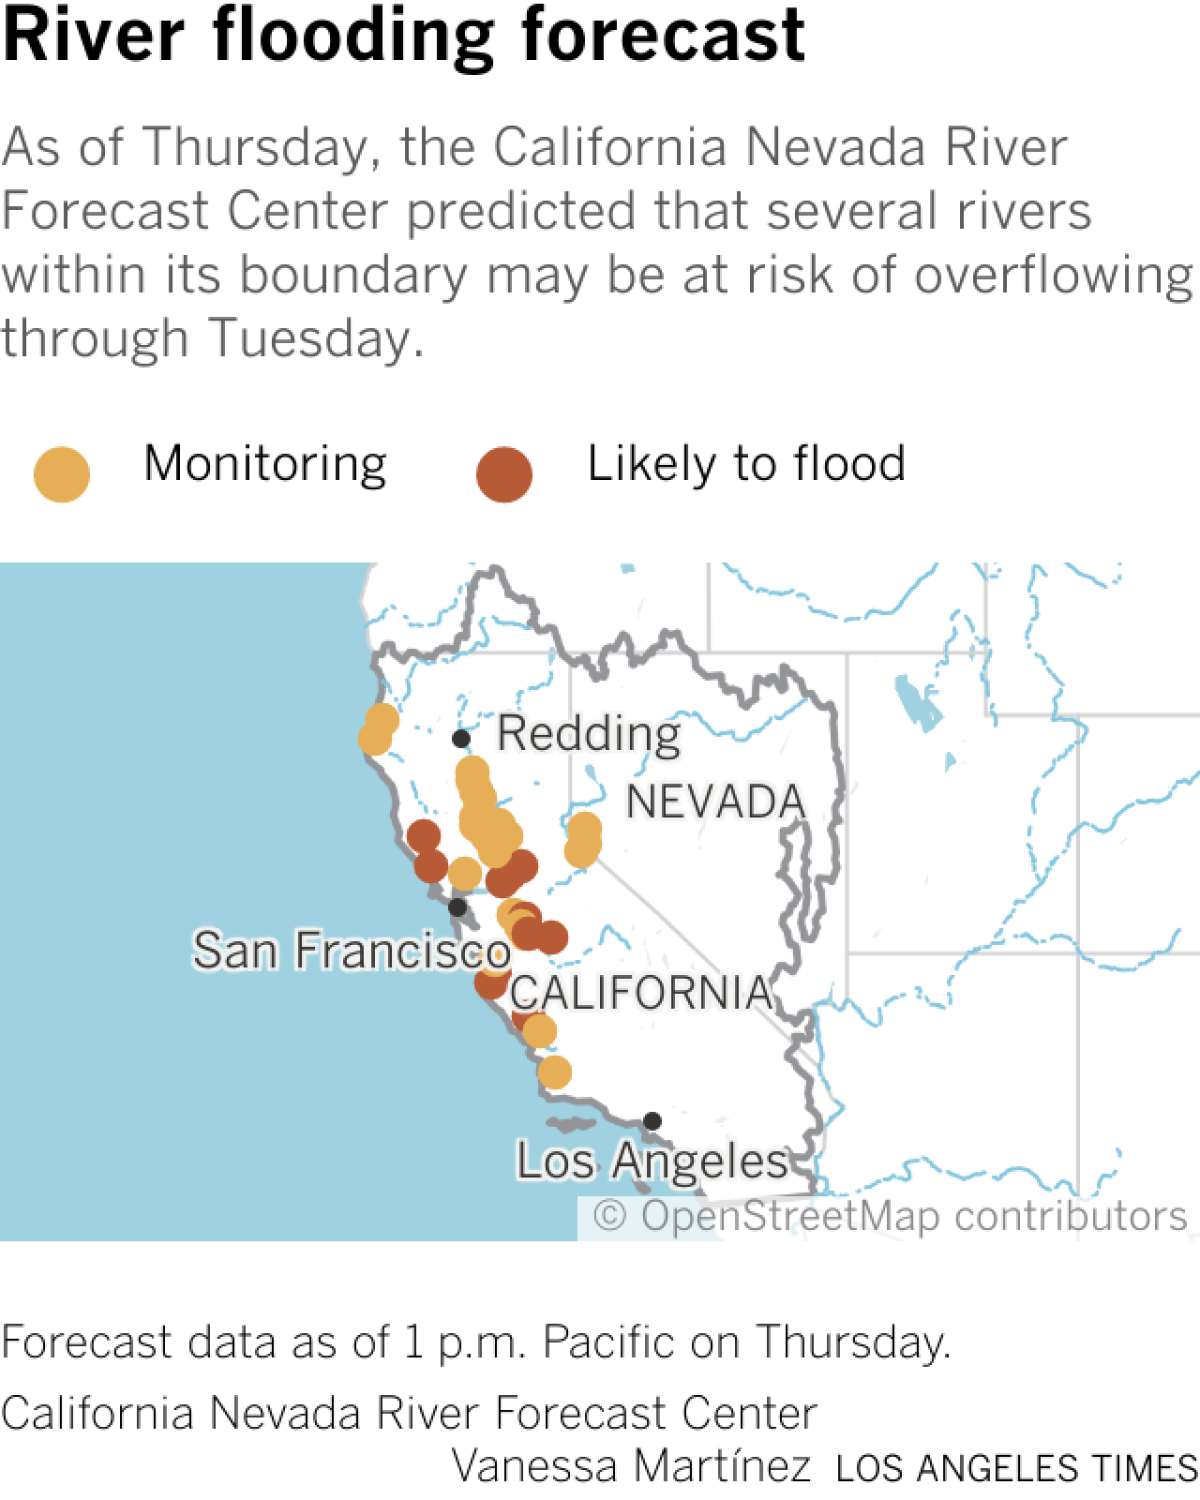 A map of river flooding forecast data from the California Nevada River Forecast Center. Through March 14, the center predicts the following rivers would be "above monitor stage": Mad River, Eel River, Napa River, Pajaro River, Salinas River, Sisquoc River, East Fork Carson River, Carson River, Sacramento River, Bear River, Yuba River and San Joaquin River. The rivers expected to be "above flood stage" are: Russian River, Salinas River, Carmel River, Bear Creek, Merced River, Tuolumne River, Cosumnes River and Mokelumne River.